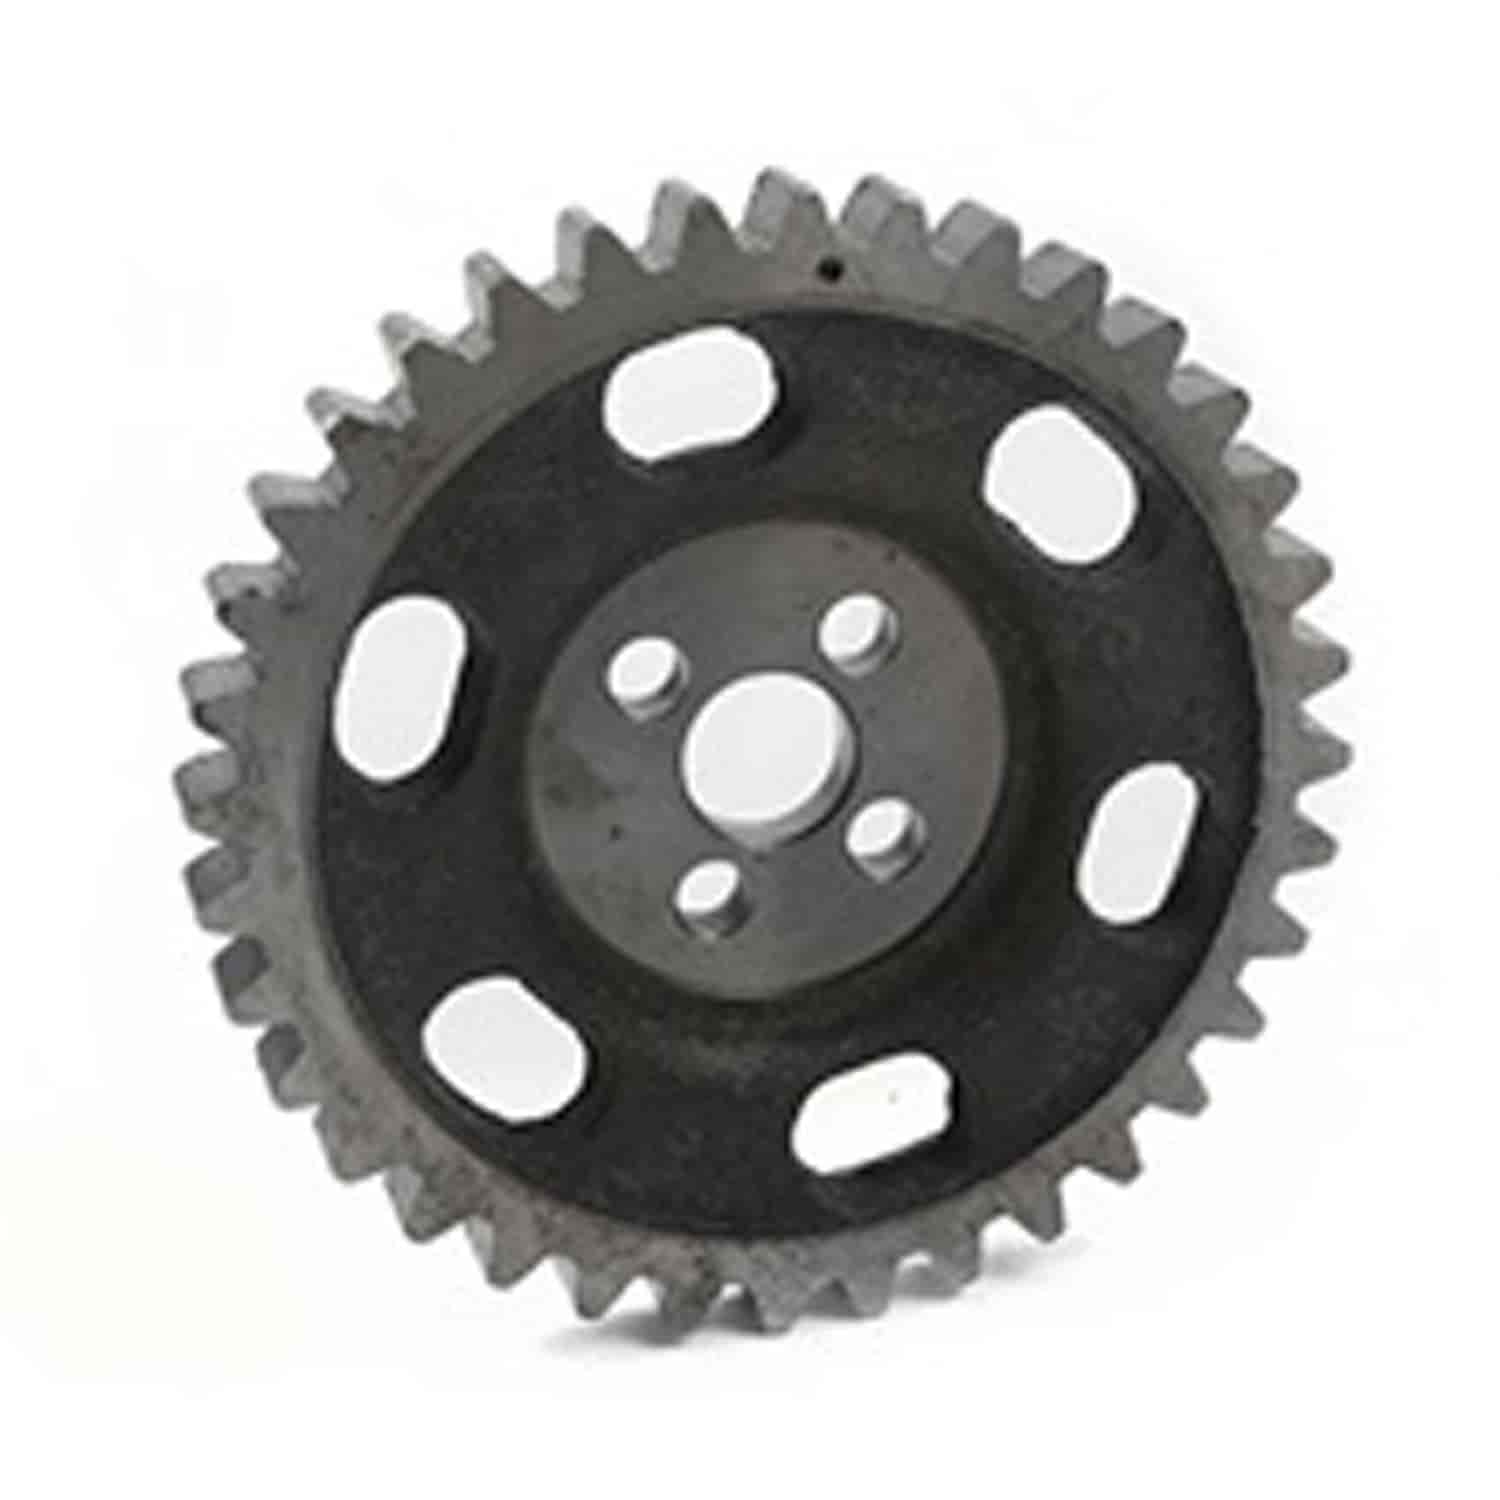 Camshaft Sprocket 134 CI L-Head With Chain Driven Camshaft 1941-1945 MB 1941-1945 Ford GPW